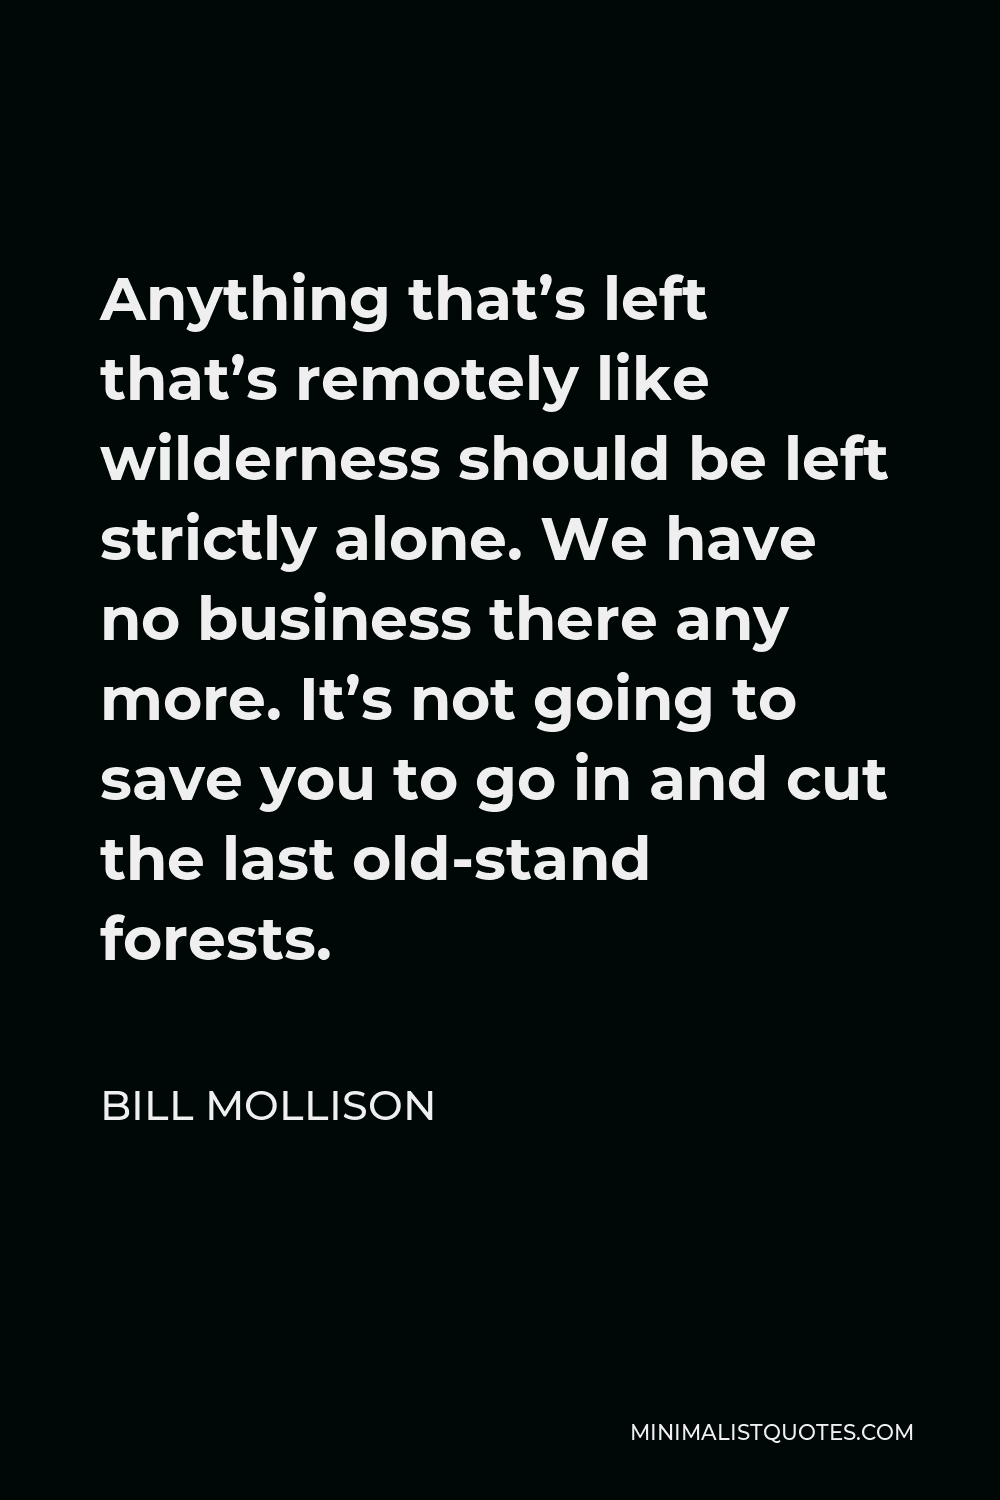 Bill Mollison Quote - Anything that’s left that’s remotely like wilderness should be left strictly alone. We have no business there any more. It’s not going to save you to go in and cut the last old-stand forests.